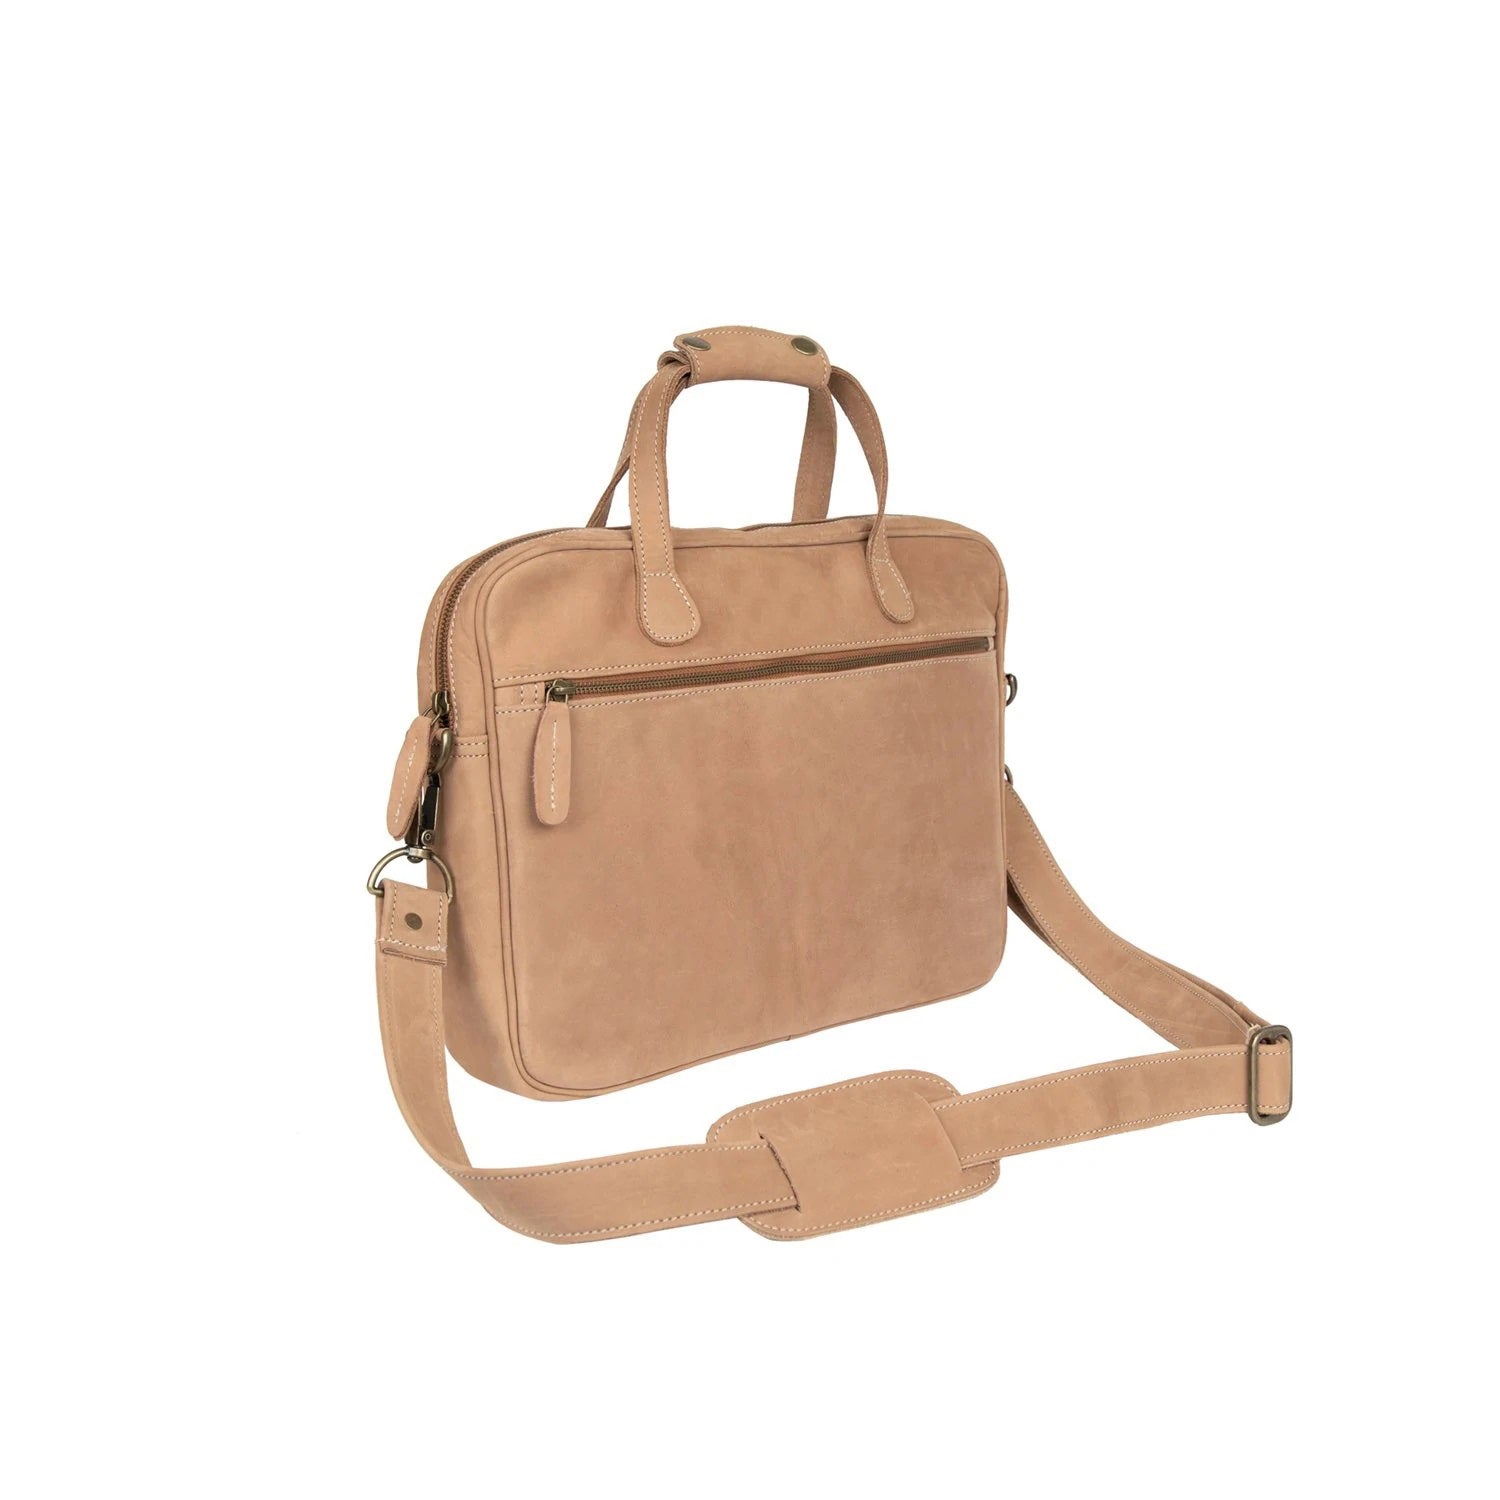 Suede Tan Leather Bag